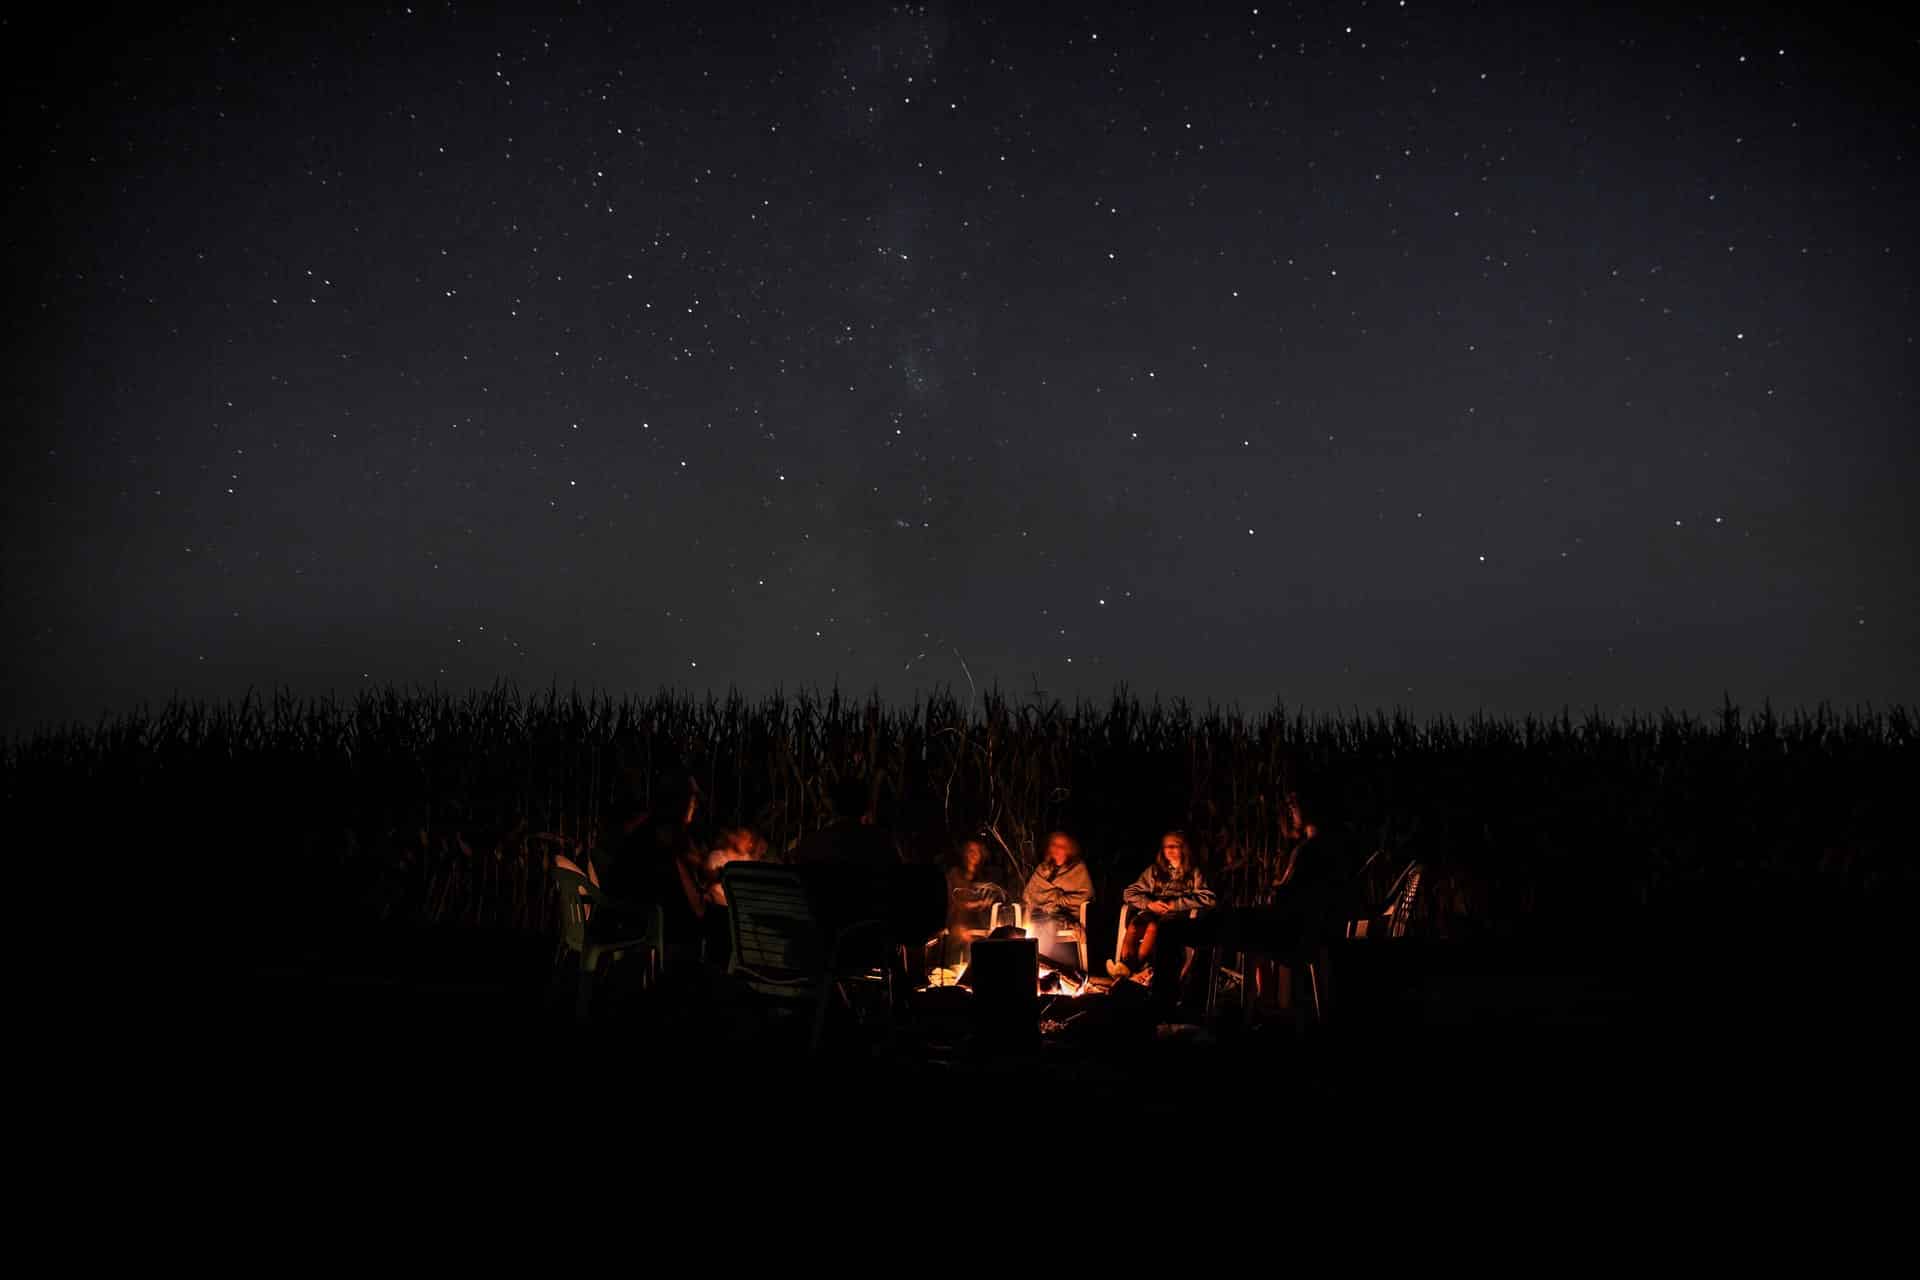 Group of people camping under star-lit sky